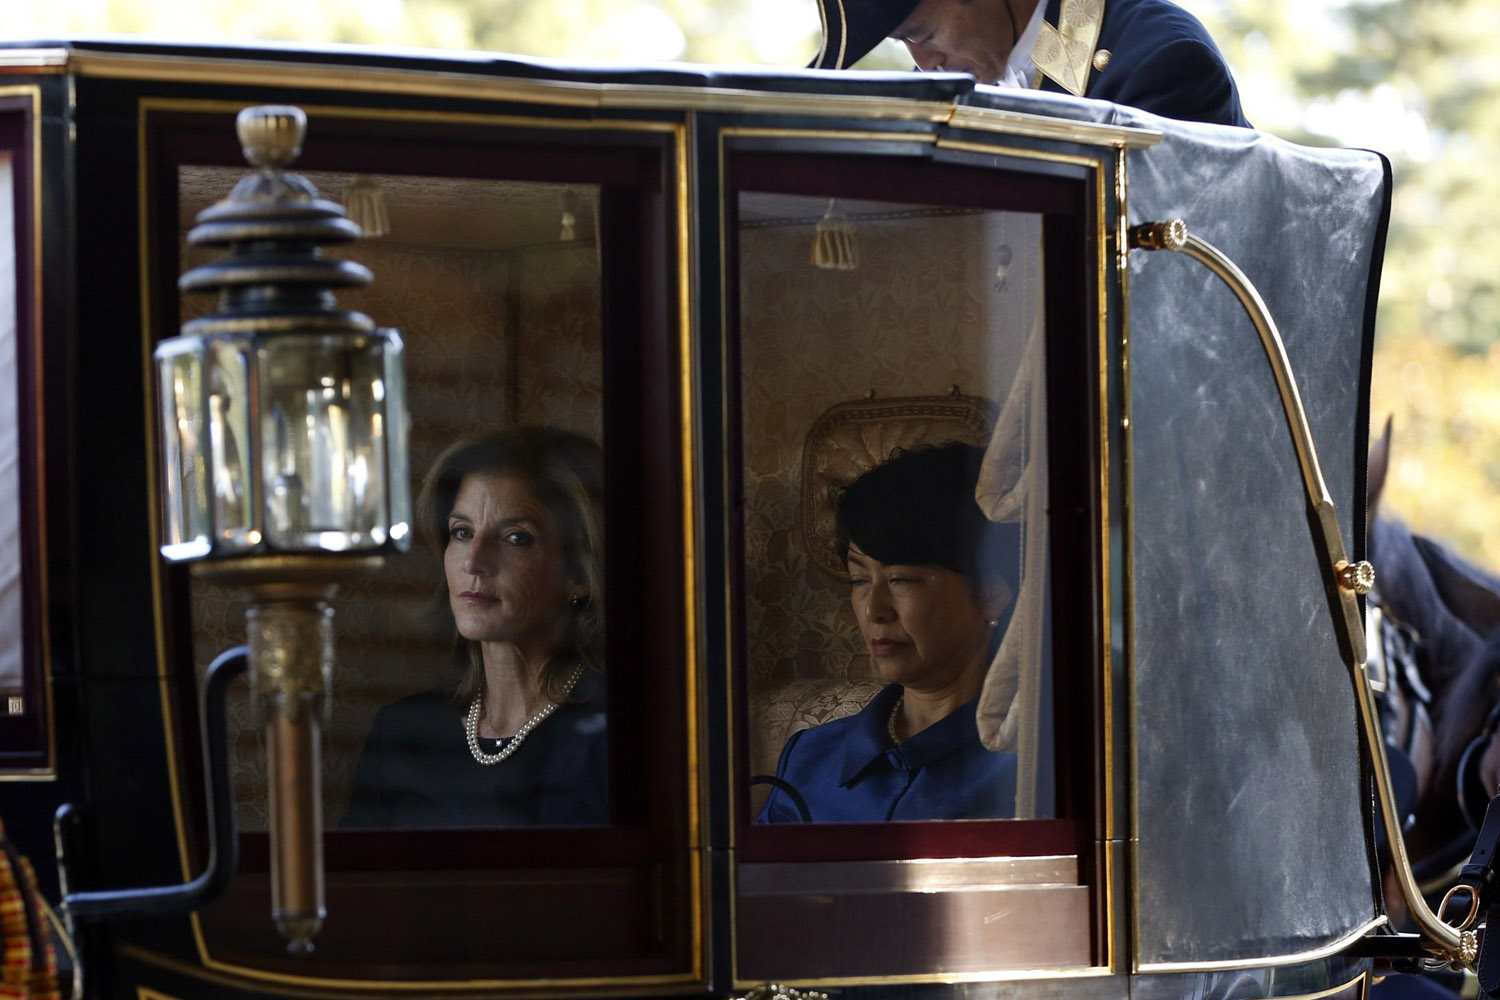 Nov. 19, 2013. Newly appointed U.S. ambassador to Japan Caroline Kennedy (C) is seen through a window of a horse-drawn carriage as she arrives at the Imperial Palace in Tokyo to present her credentials to Japan's Emperor Akihito.